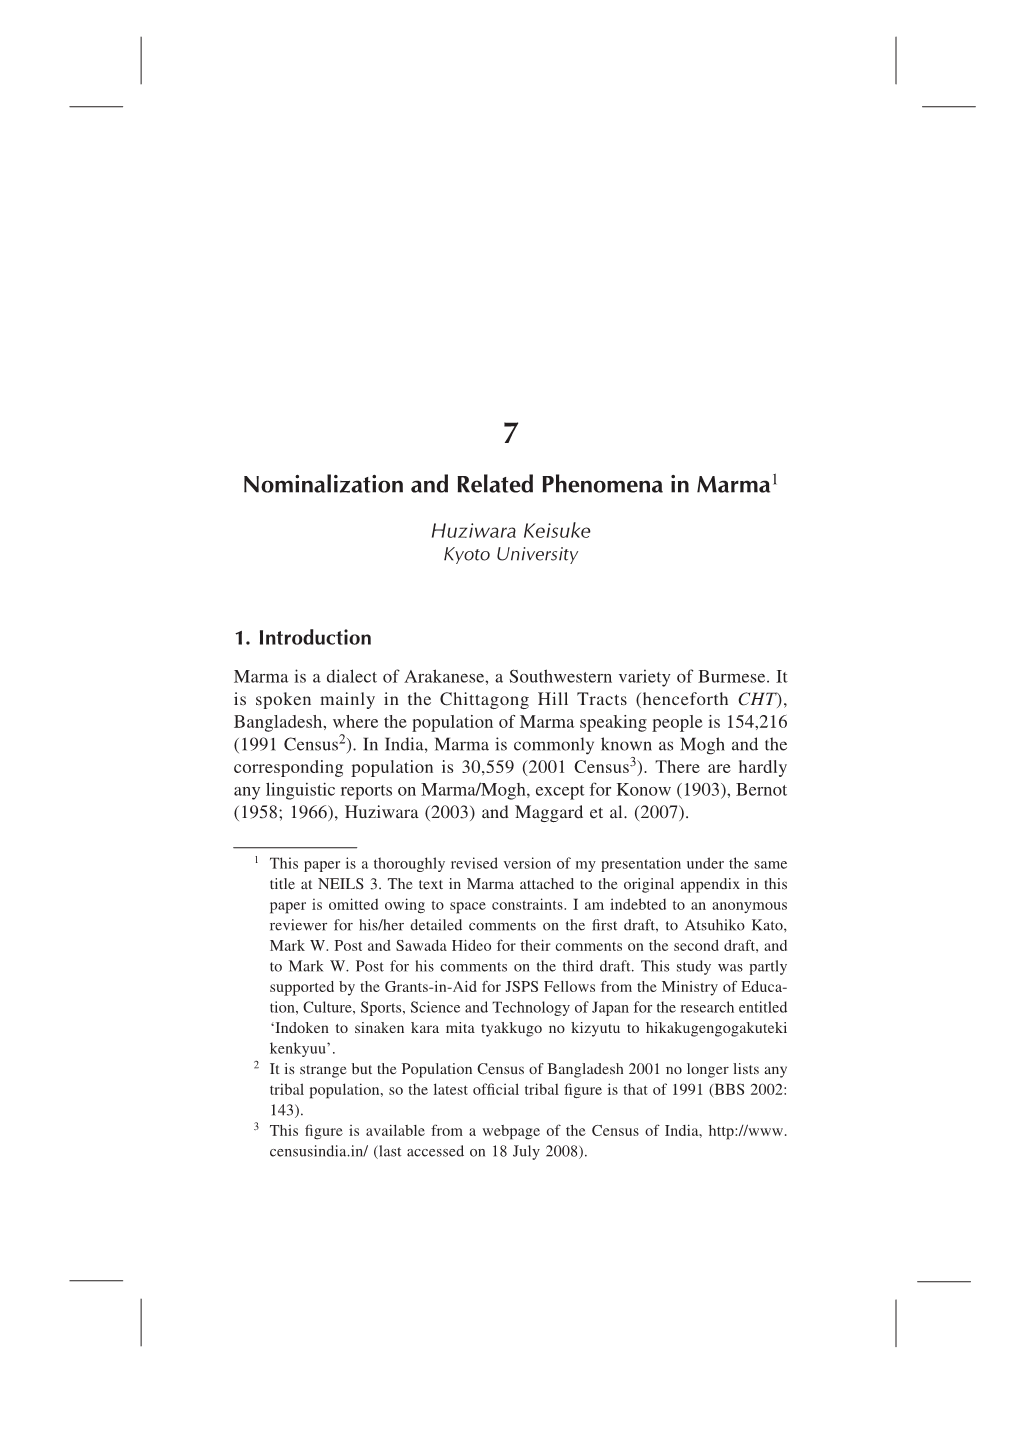 Nominalization and Related Phenomena in Marma1